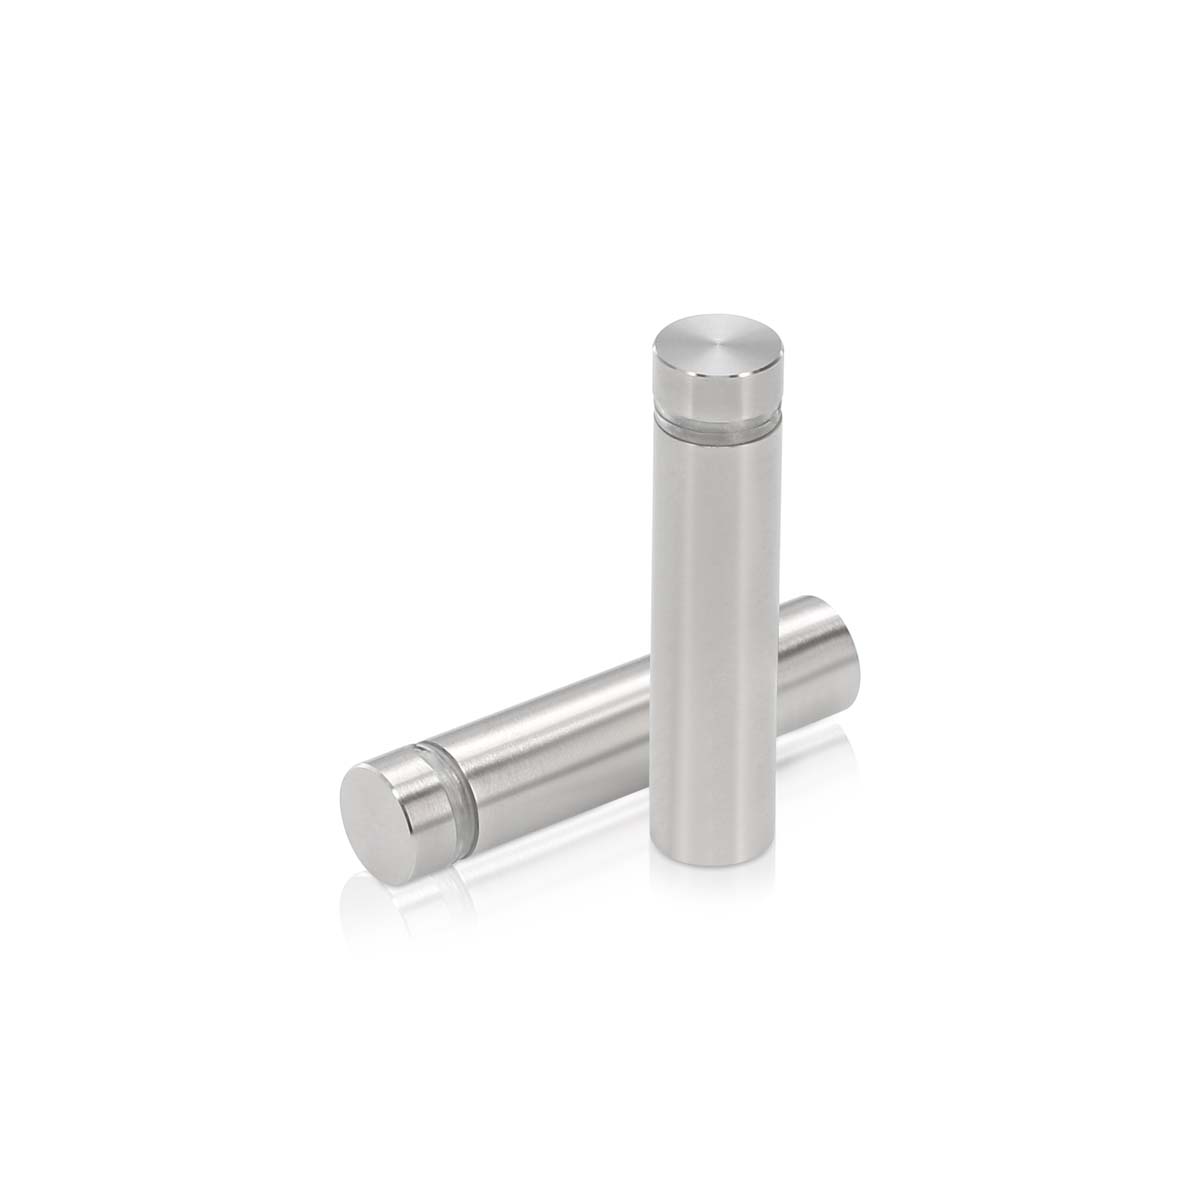 1/2'' Diameter X 1-3/4'' Barrel Length, Hollow Stainless Steel Brushed Finish. Easy Fasten Standoff (For Inside Use Only) [Required Material Hole Size: 3/8'']